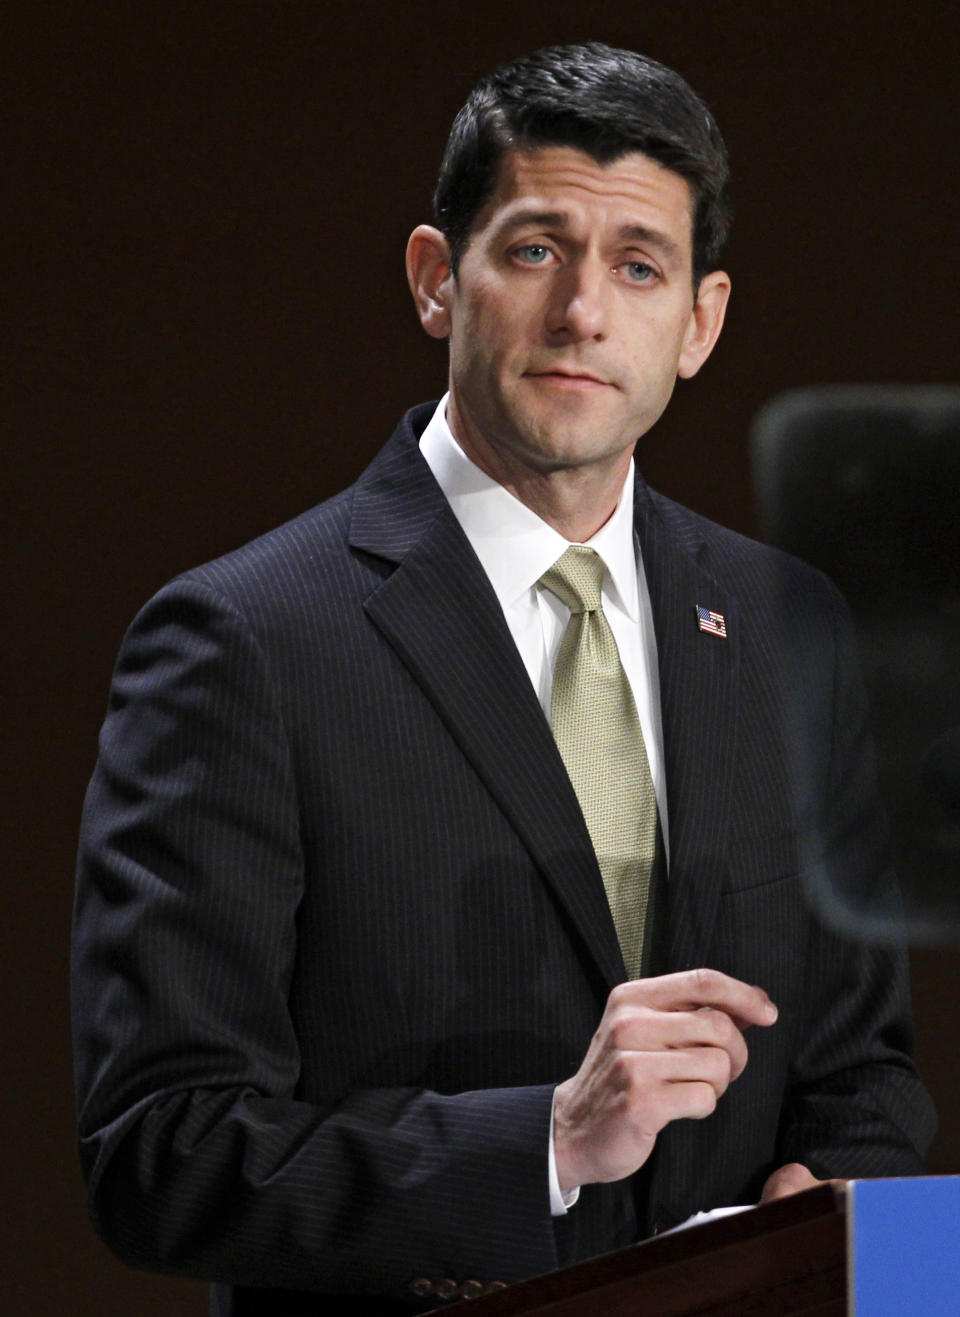 Republican vice presidential candidate Rep. Paul Ryan, R-Wis. gestures while speaking about upward mobility and the economy during a campaign rally at the Walter B. Waetjen Auditorium at Cleveland State University, Wednesday, Oct. 24, 2012, in Cleveland. (AP Photo/Tony Dejak)